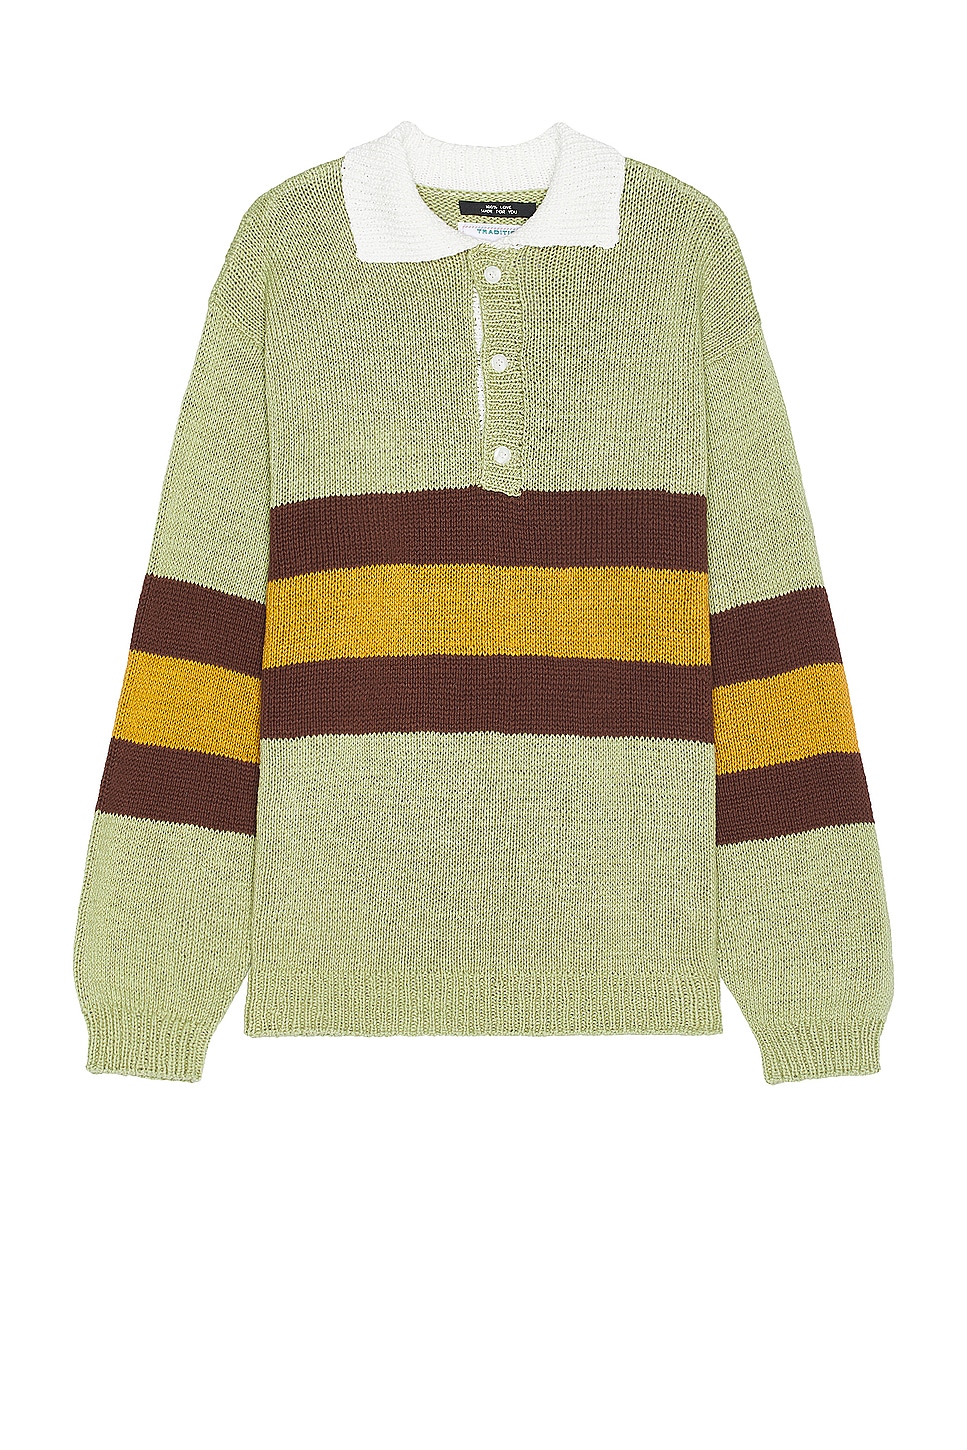 Image 1 of rice nine ten Hand Knitting Rugby Shirt in Tea Green